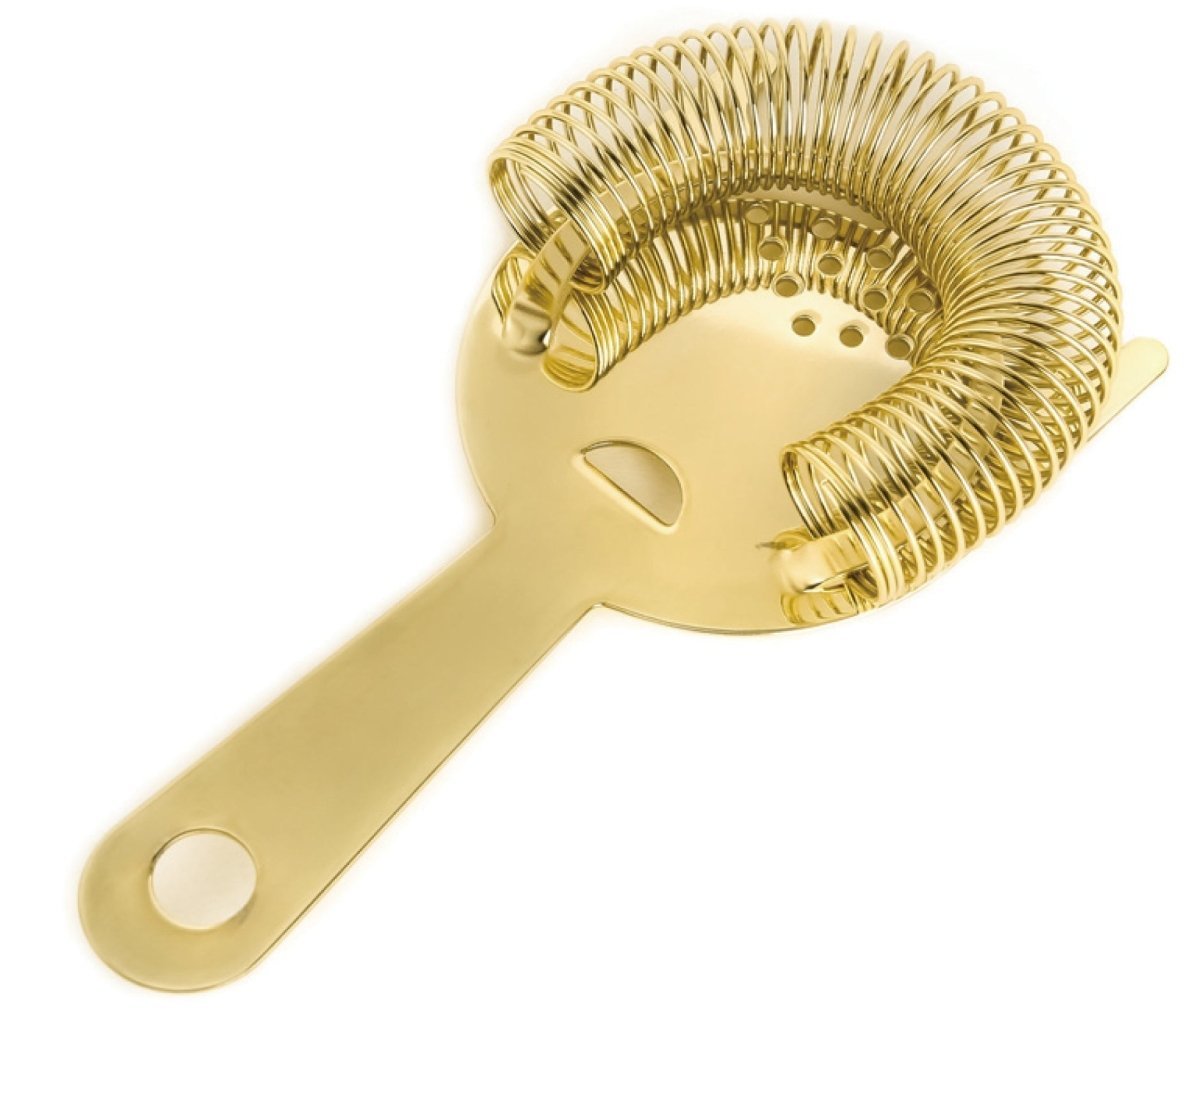 Gold Plated Professional Cocktail Strainer - Straight Ear - Easiley - STRH1215-EAR